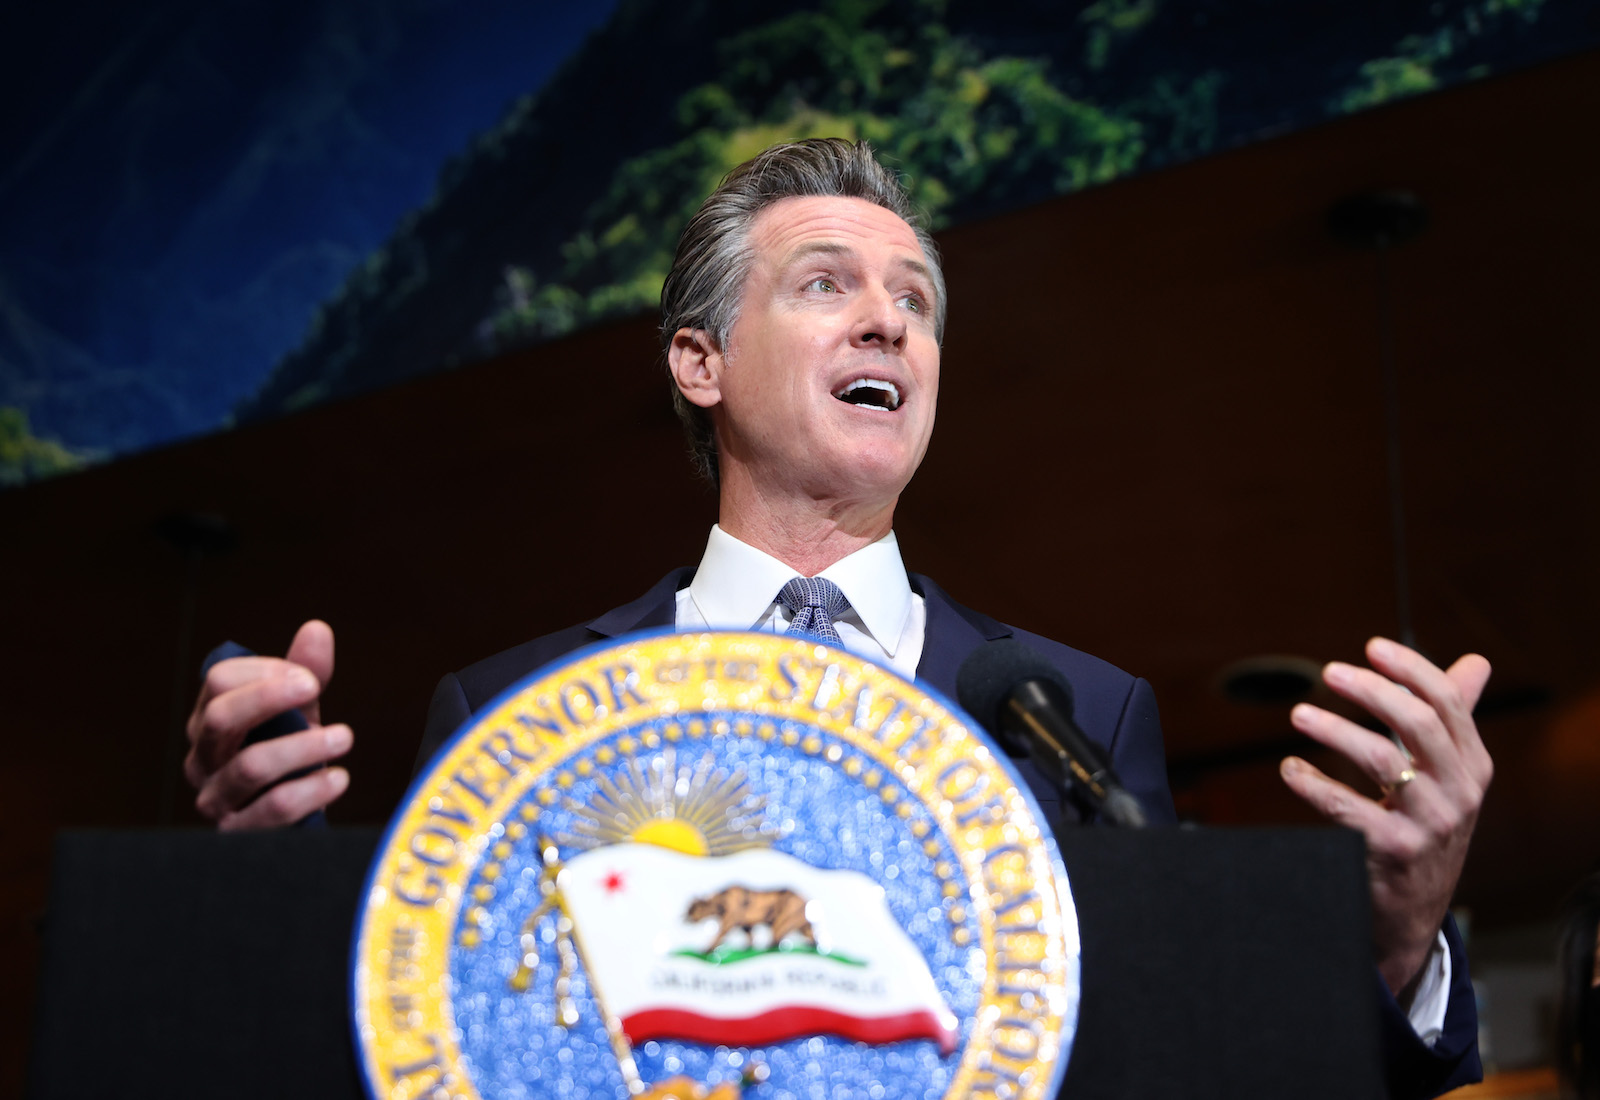 California Governor Gavin Newsom -- a man with slightly graying hair wearing a dark suit -- stands in front of a microphone on stand with the seal of California on it